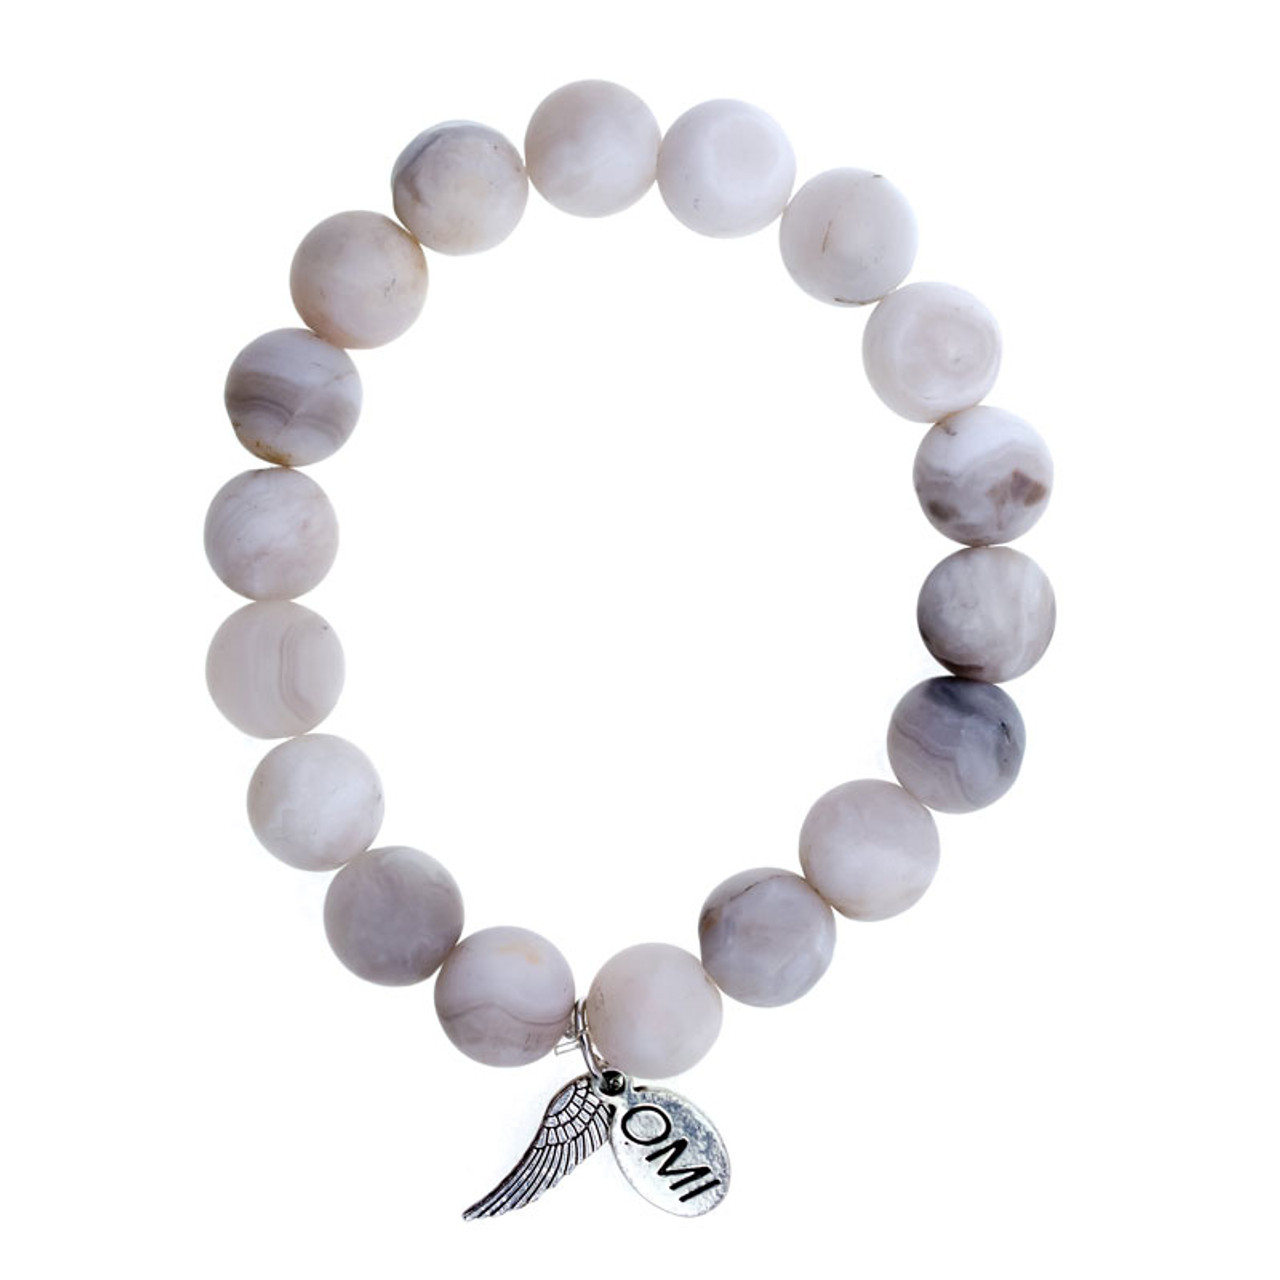 White Marble Howlite Stone Bead Bracelet with Silver Bar and